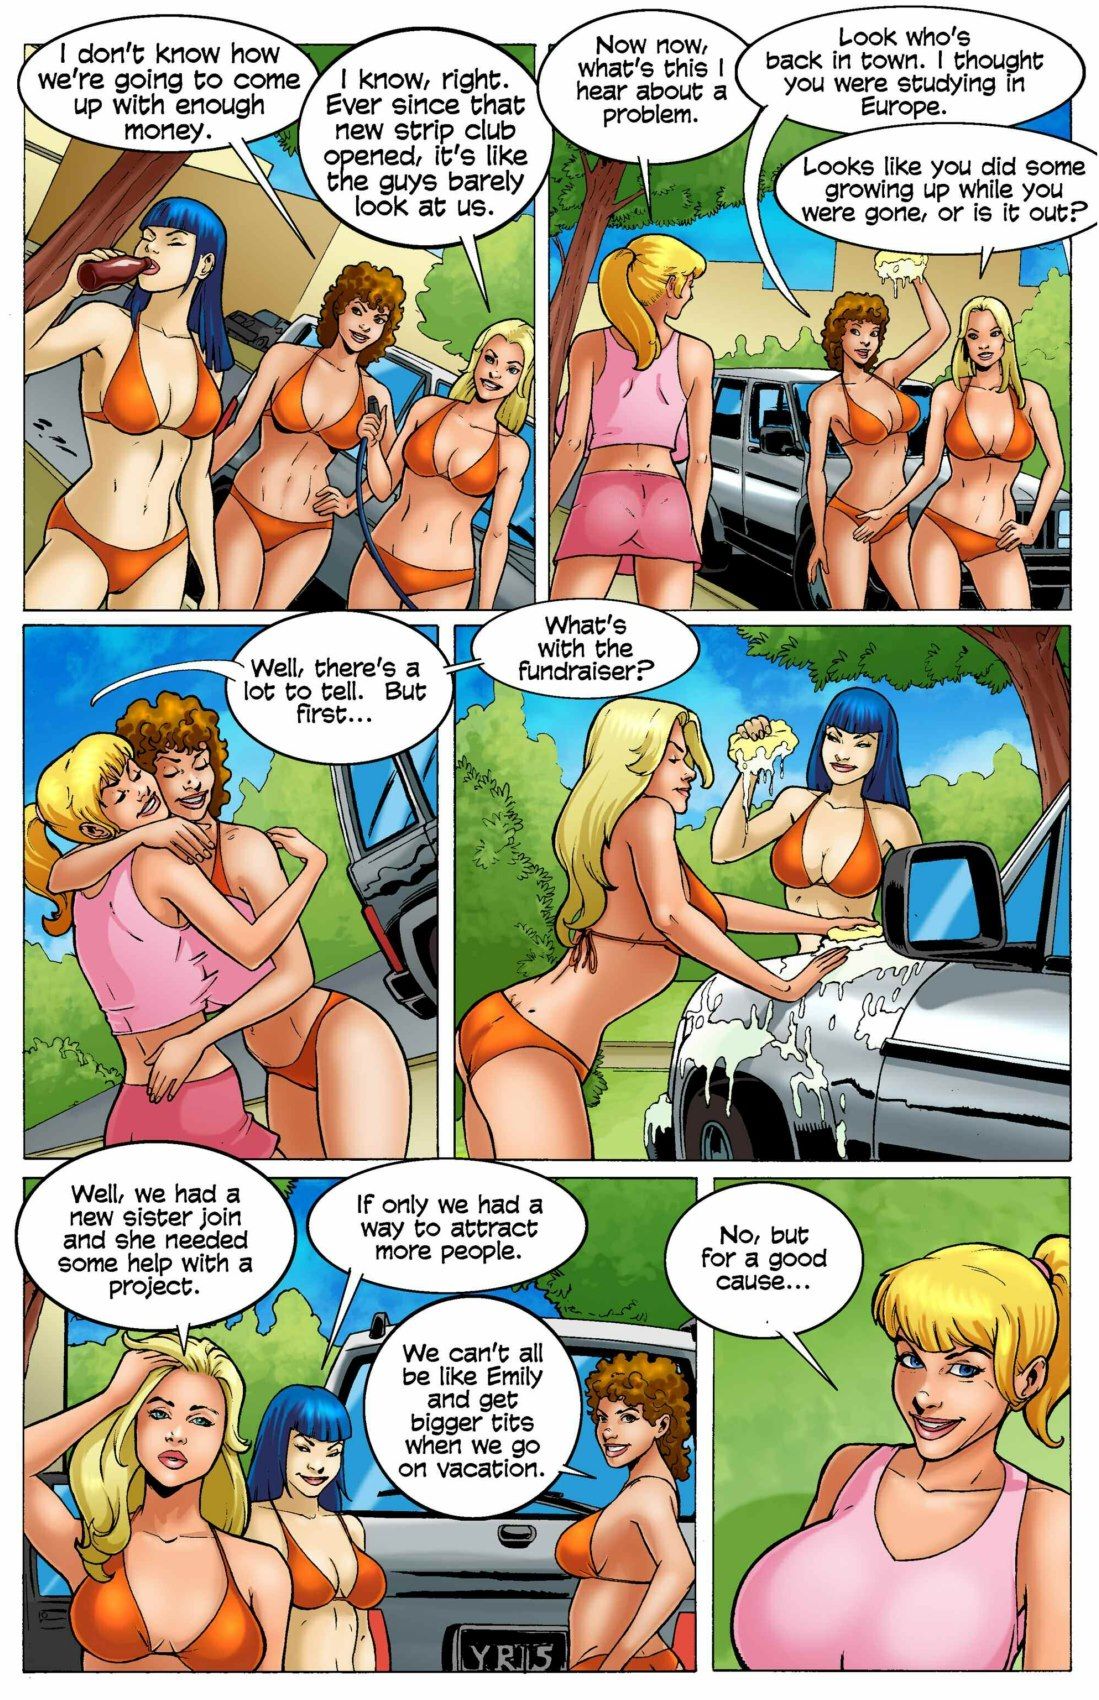 Lilith 3 & 4 - The Learning Curve (BotComics) page 4